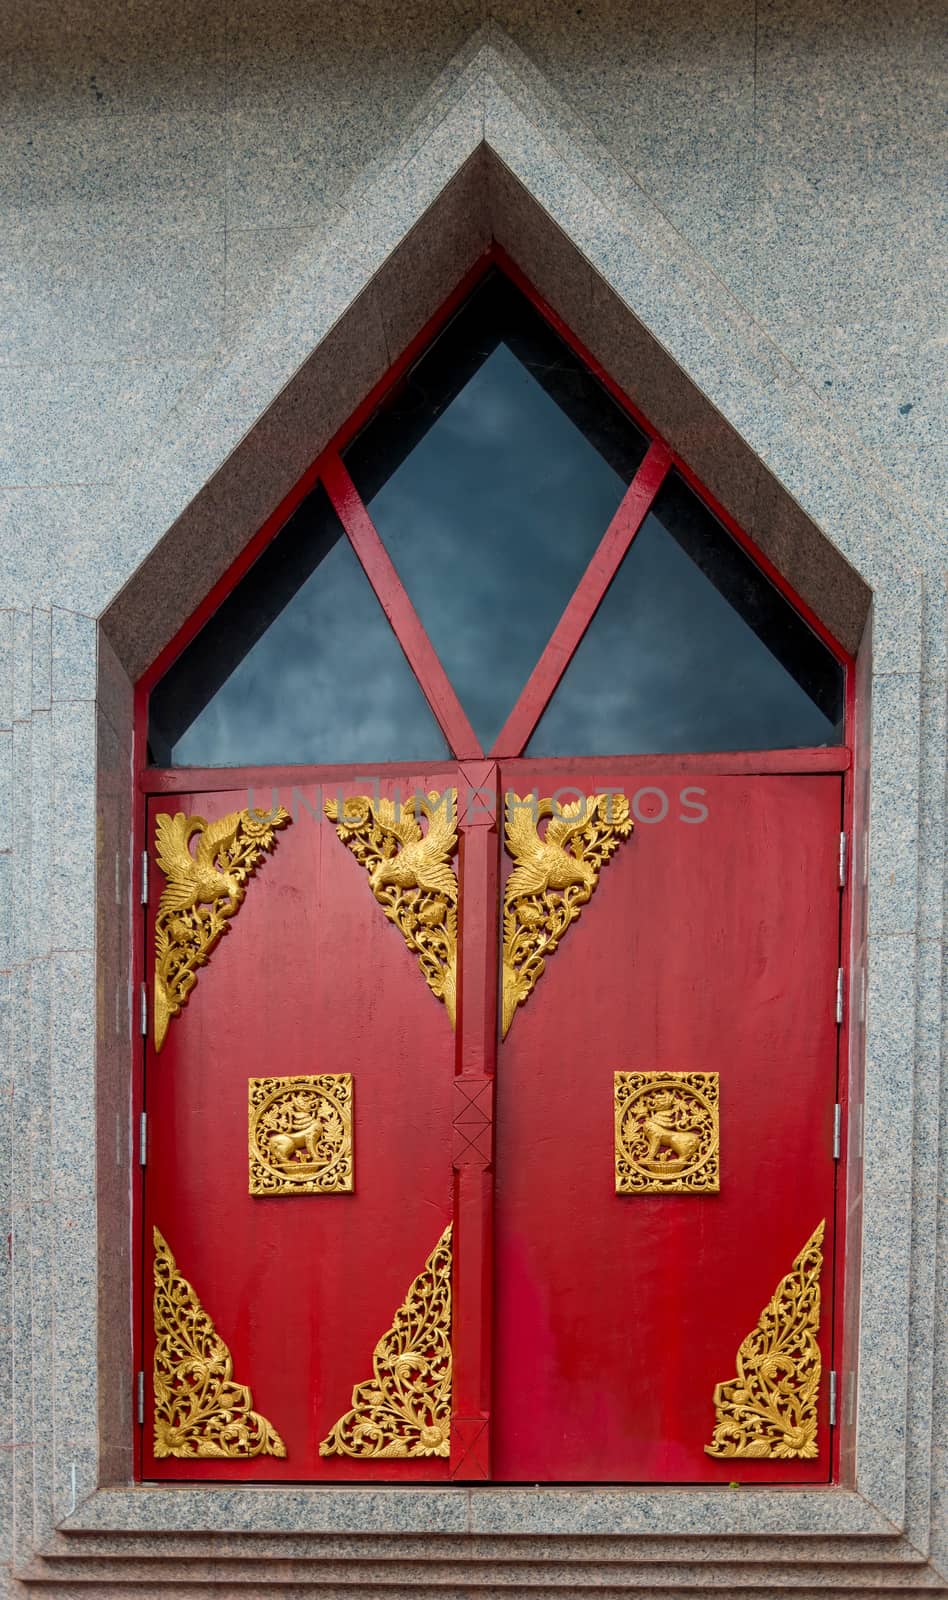 red window shutters decorated with gold ornaments on a temple in by kosmsos111